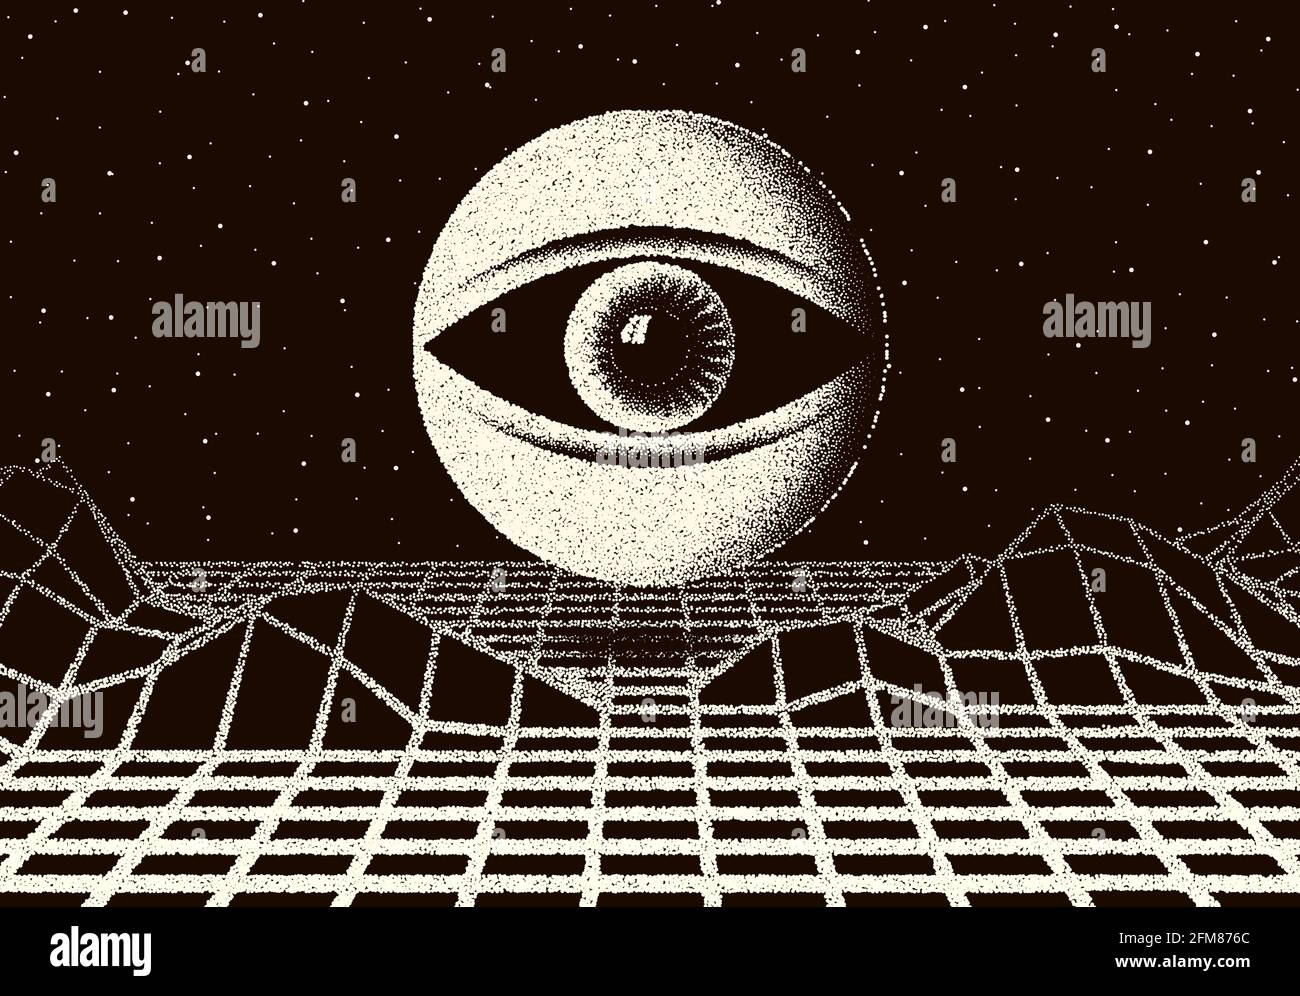 Retro dotwork landscape with 60s or 80s styled alien robotic space eye over the desert planet. Background with old sci-fi style. Stock Vector